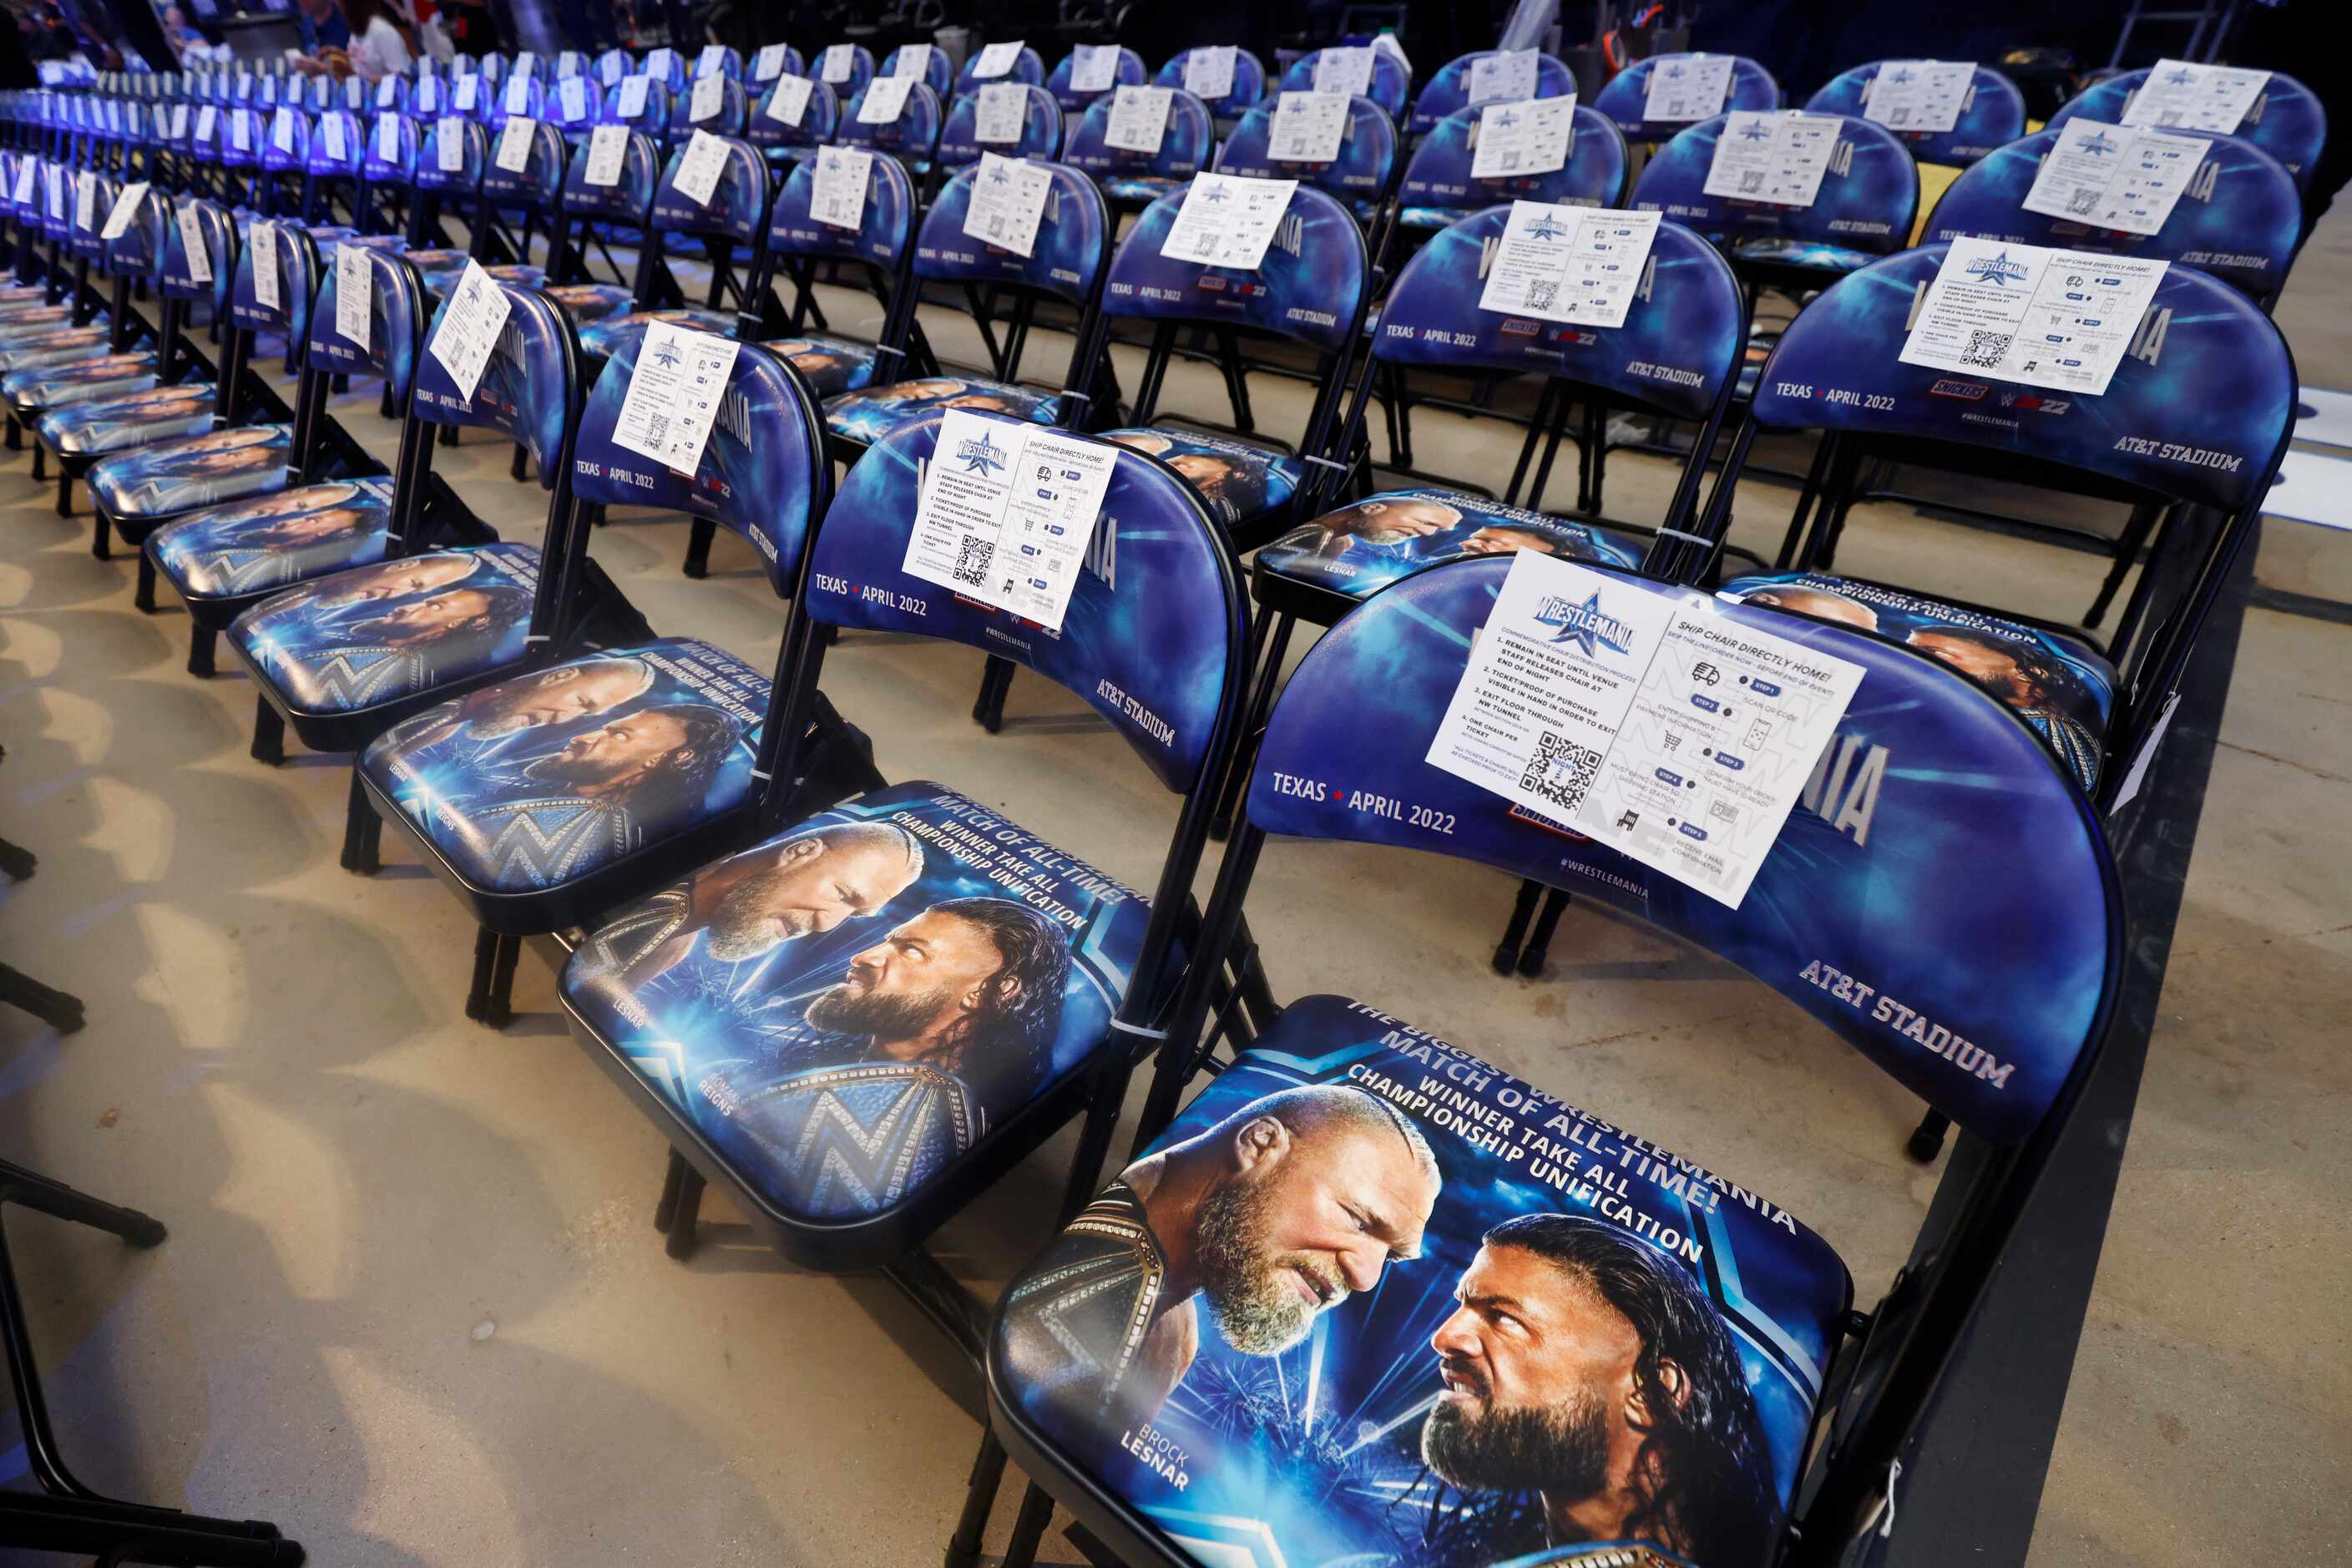 Chairs for premium floor during WrestleMania in Arlington, Texas on Sunday, April 3, 2022. 